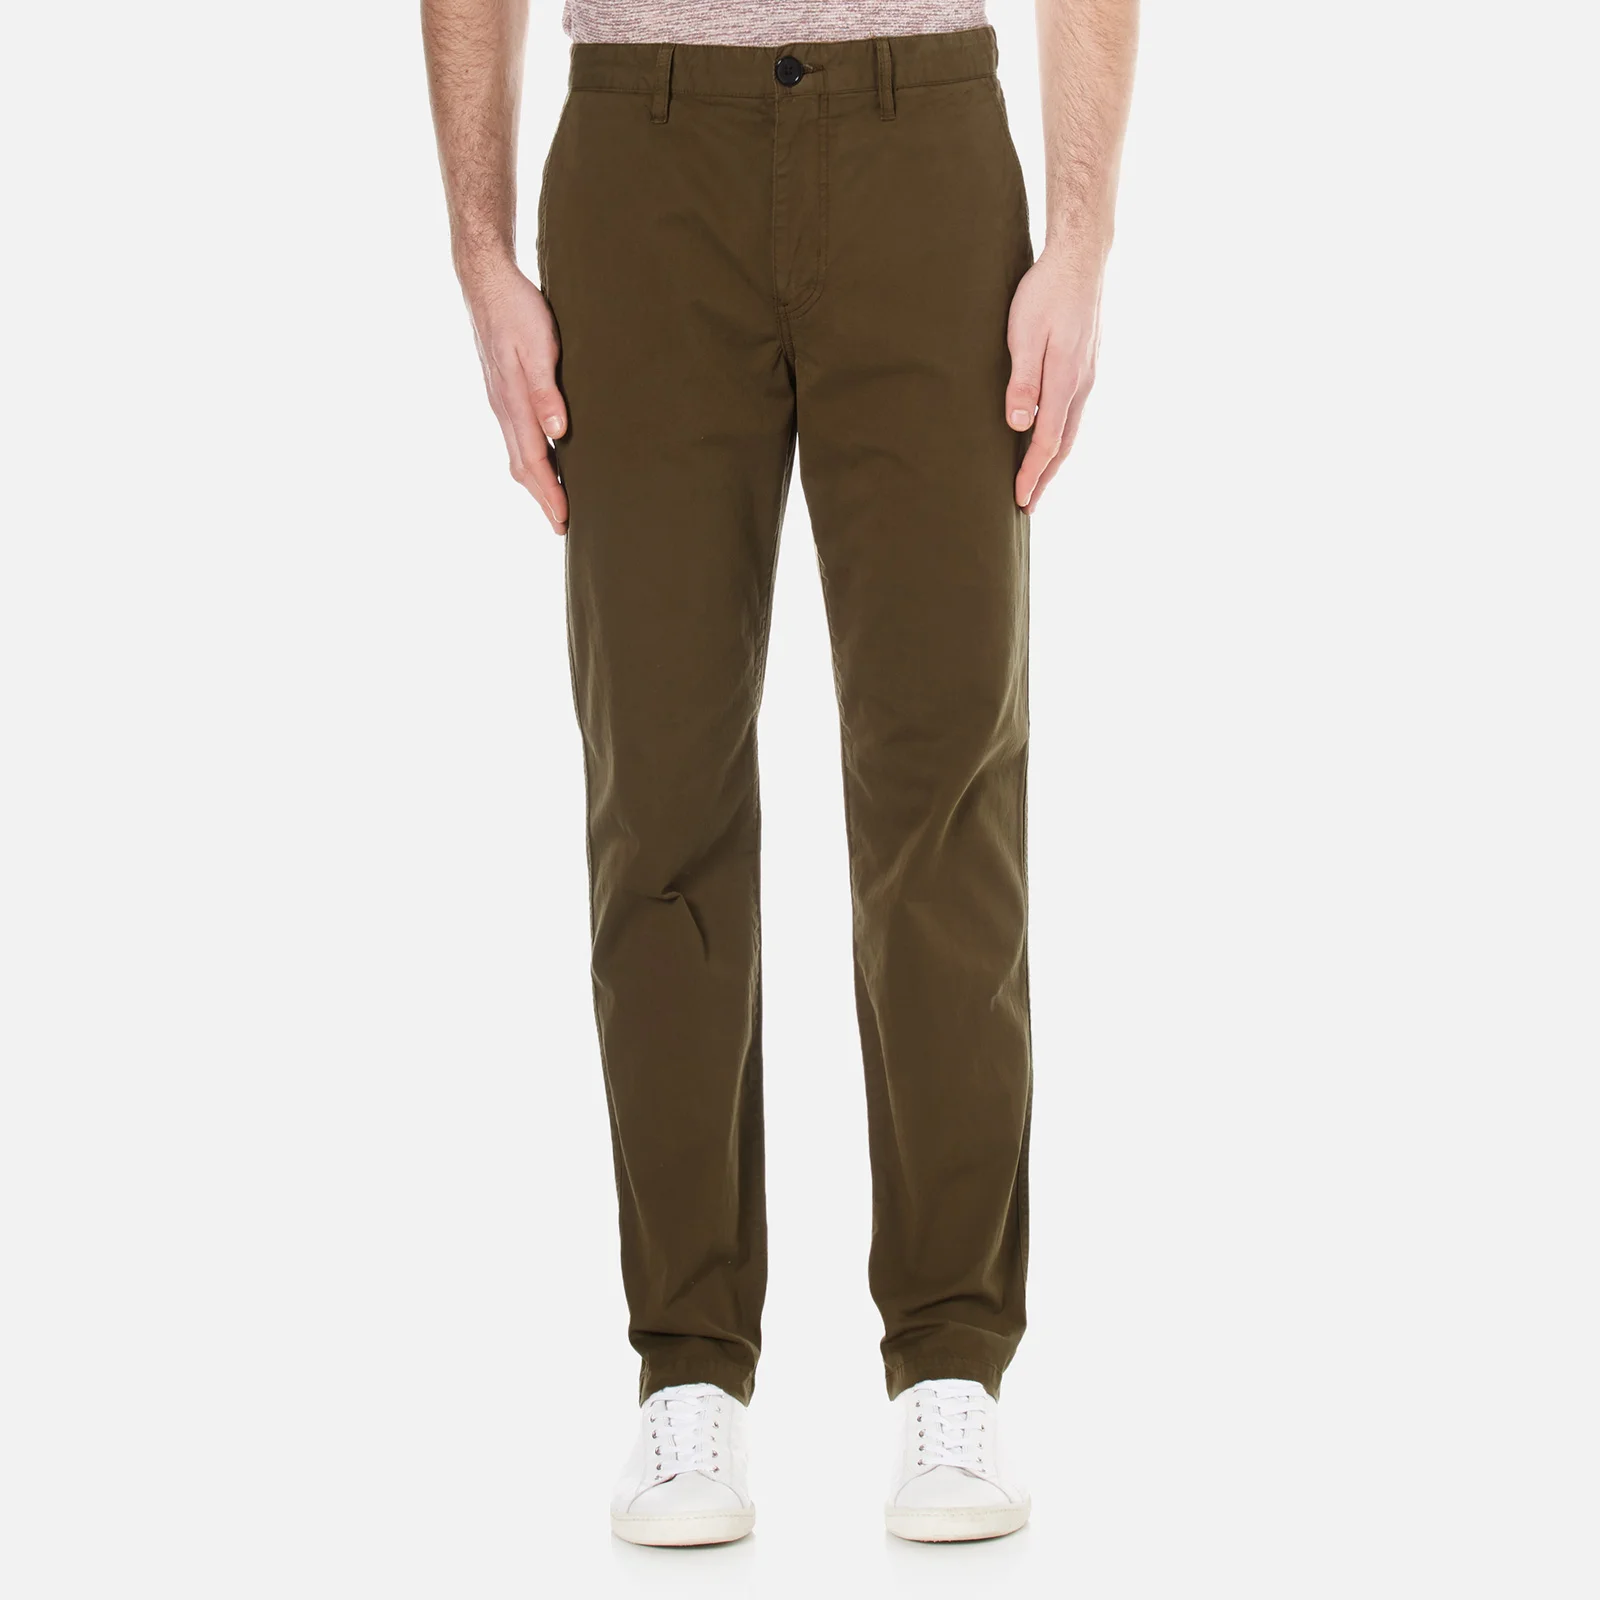 PS by Paul Smith Men's Tapered Fit Chinos - Khaki Image 1